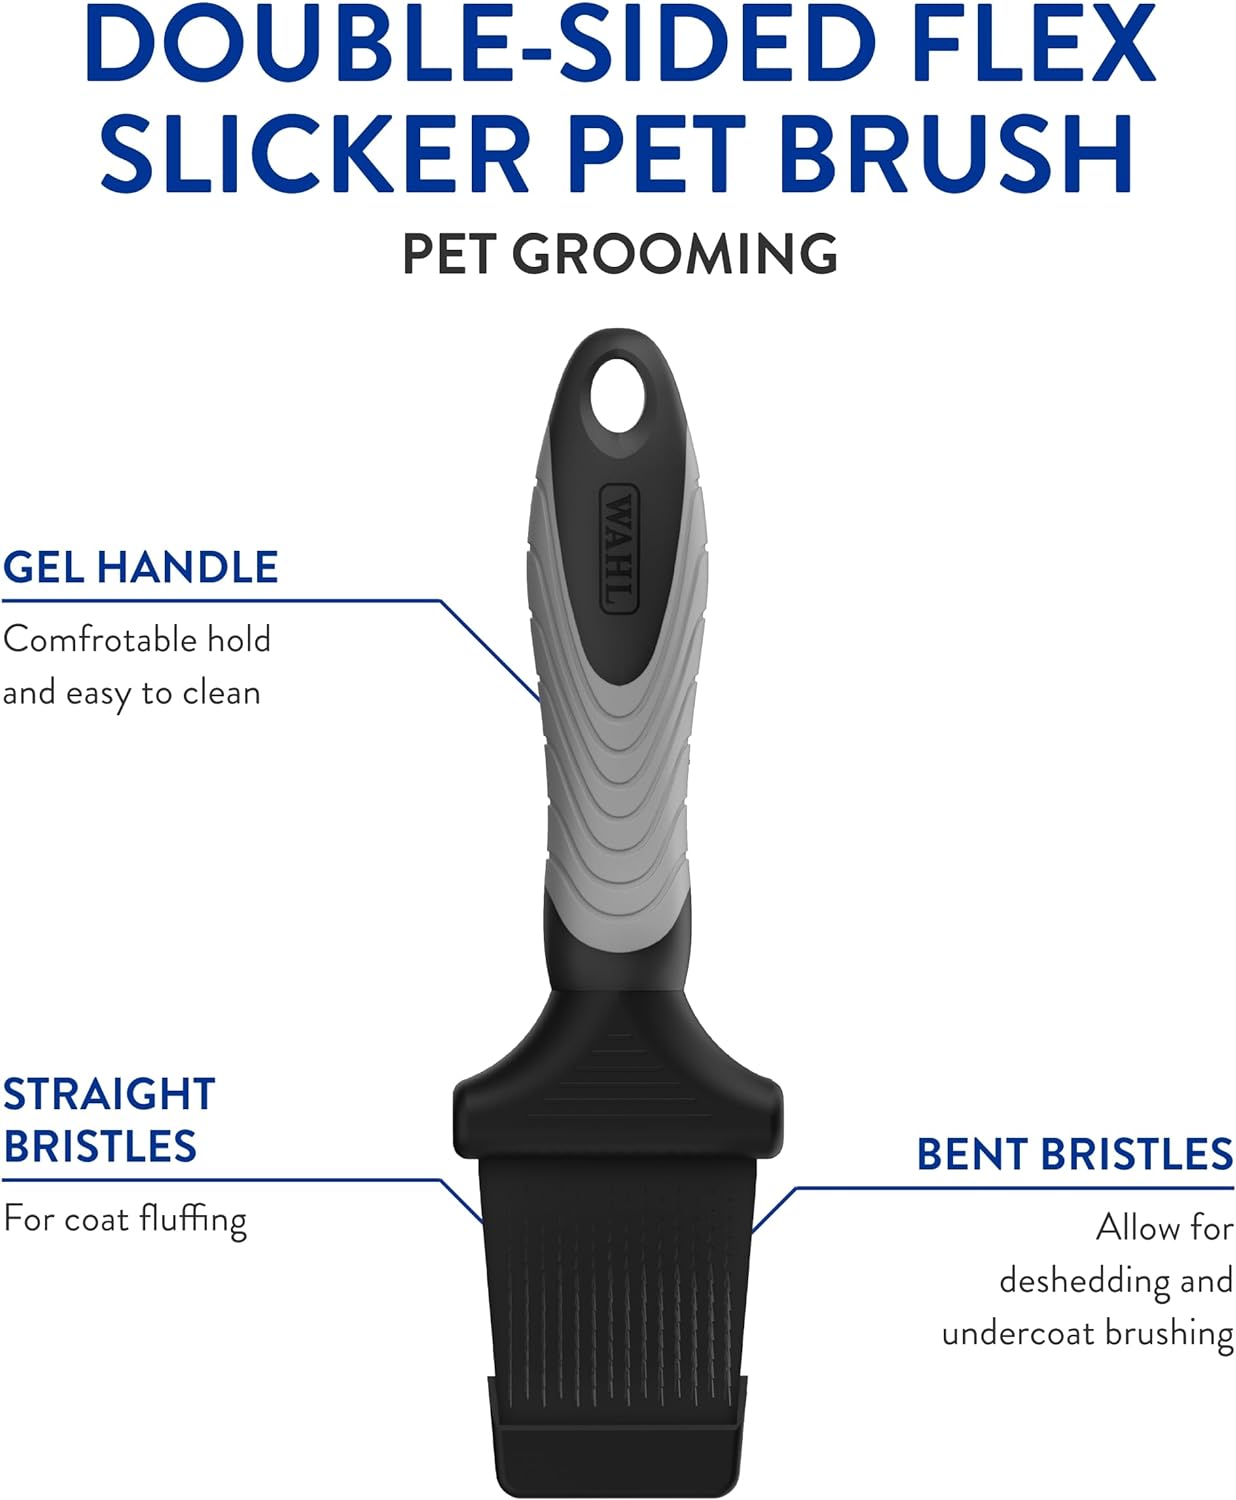 WAHL Professional Animal Grooming Products (Slicker Brush, Double Sided Brush, or Nail Clippers)